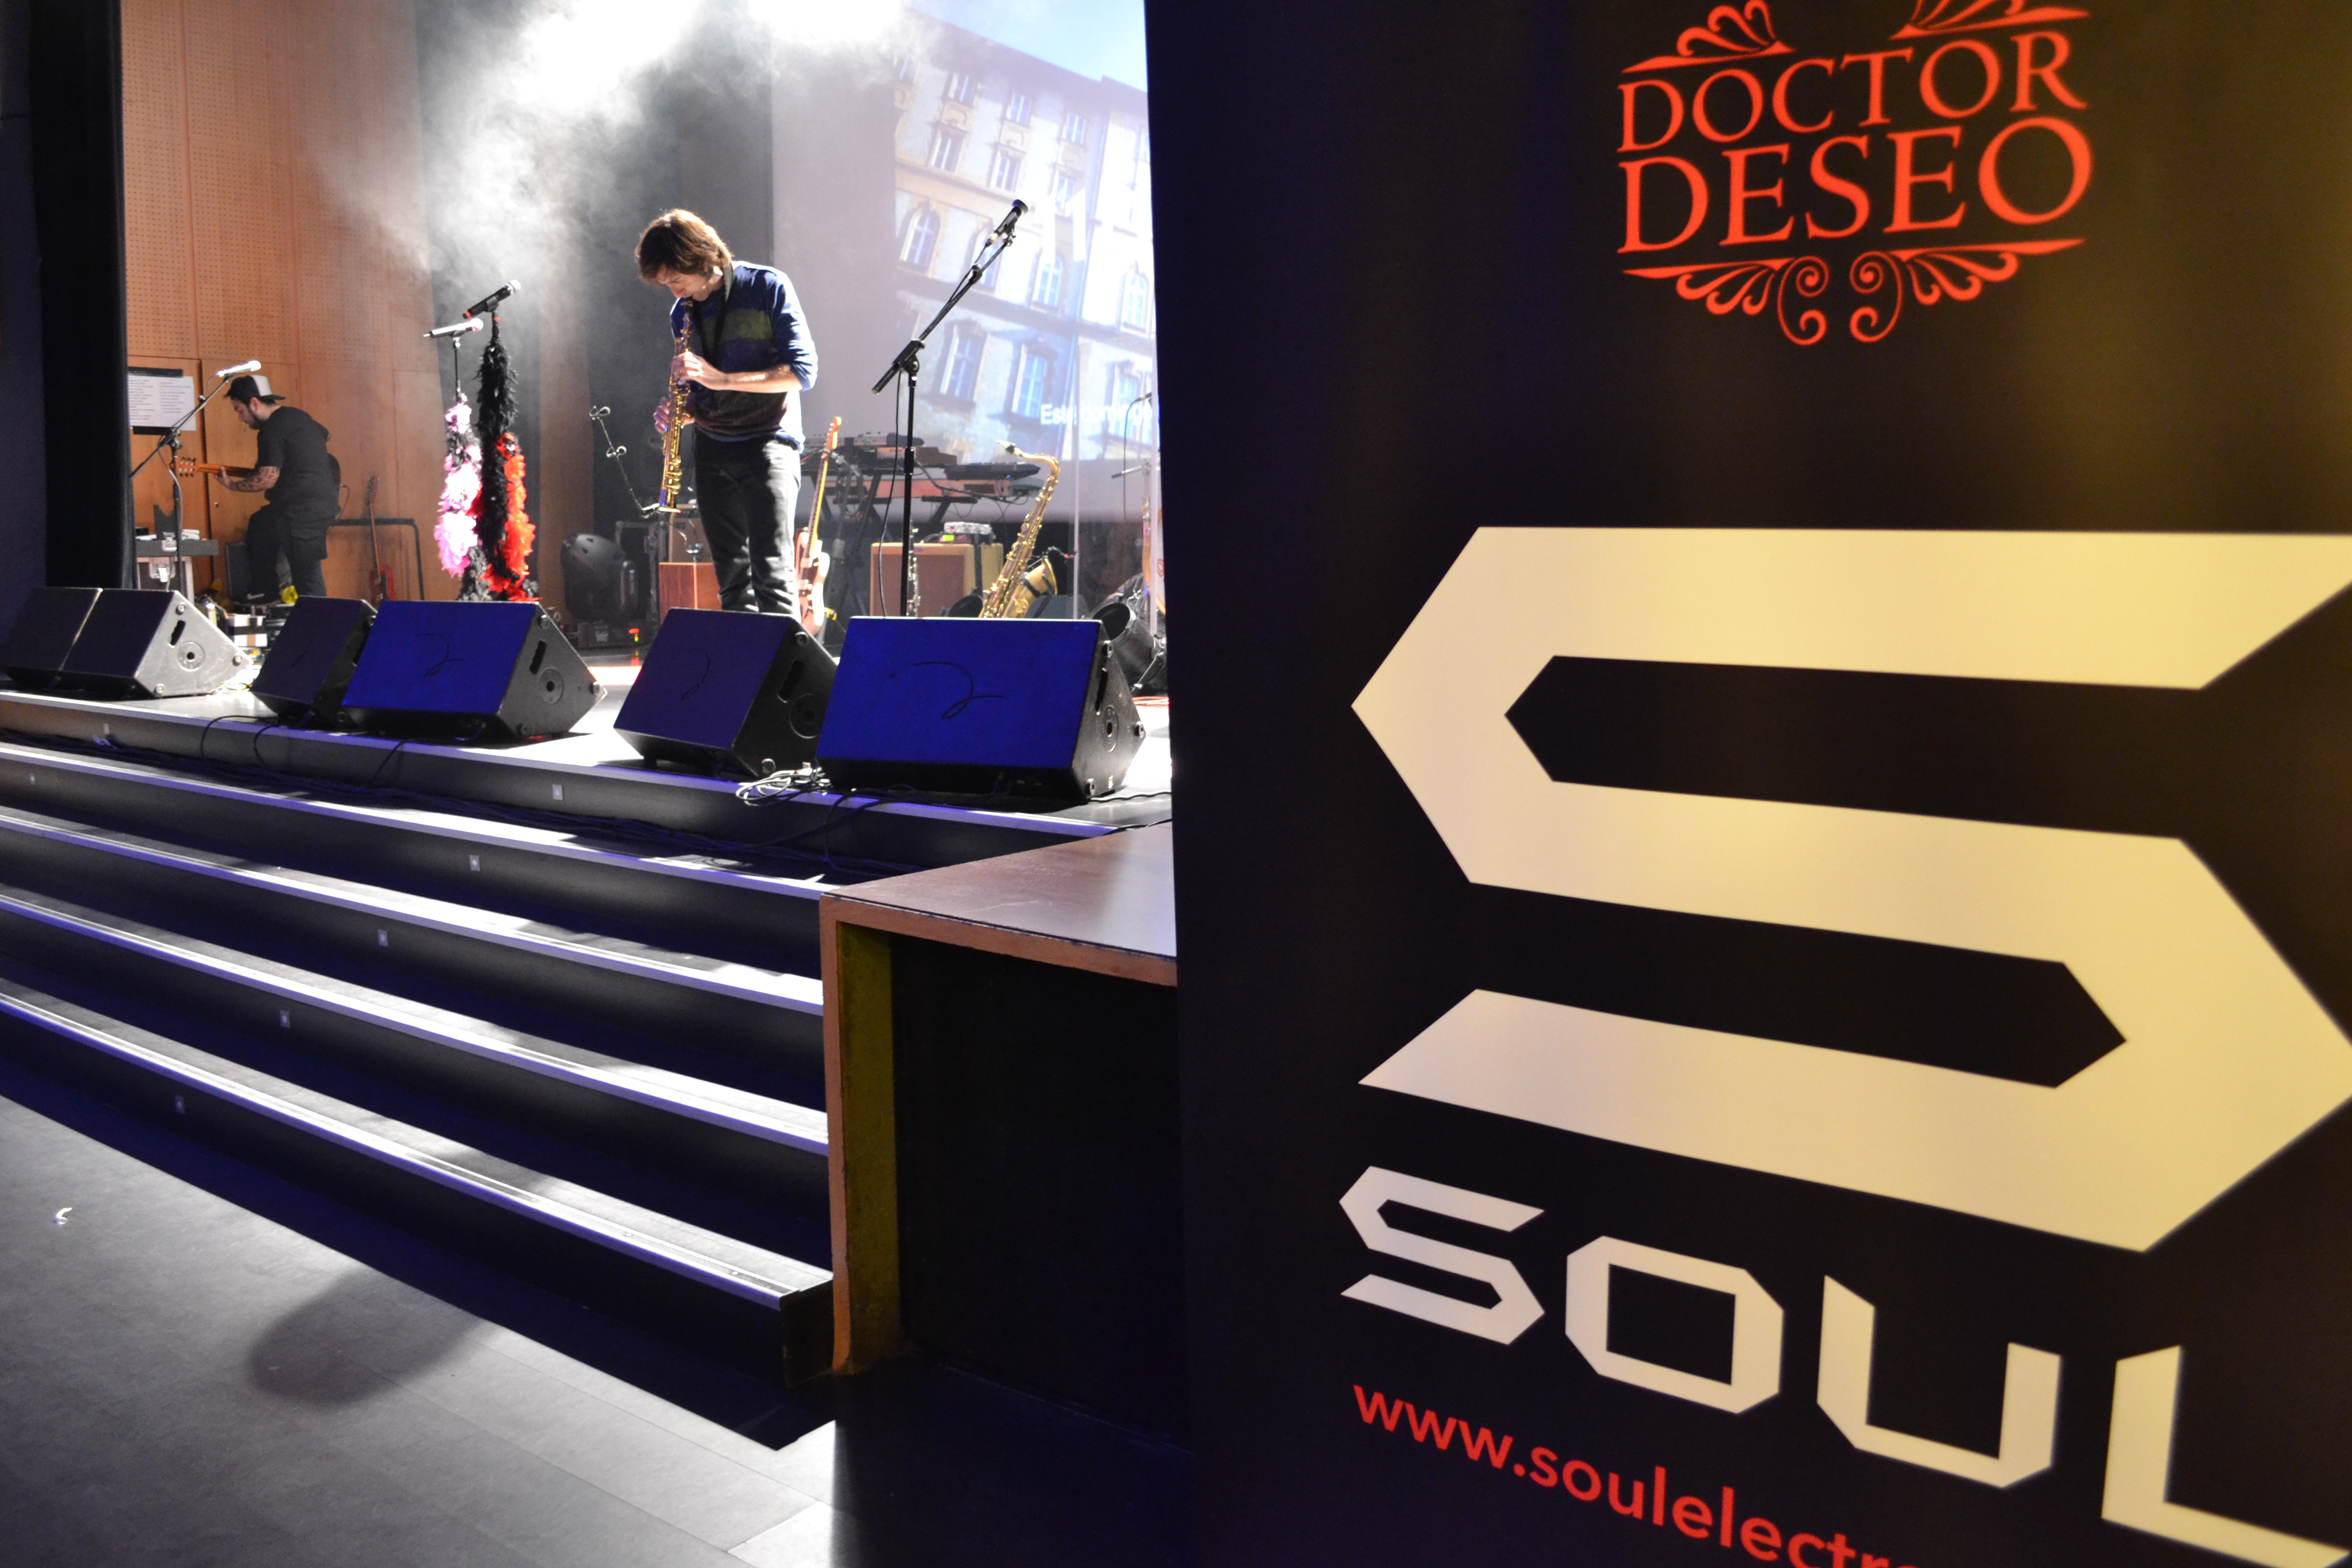 SOUL with Doctor Deseo’s 2012 Tour